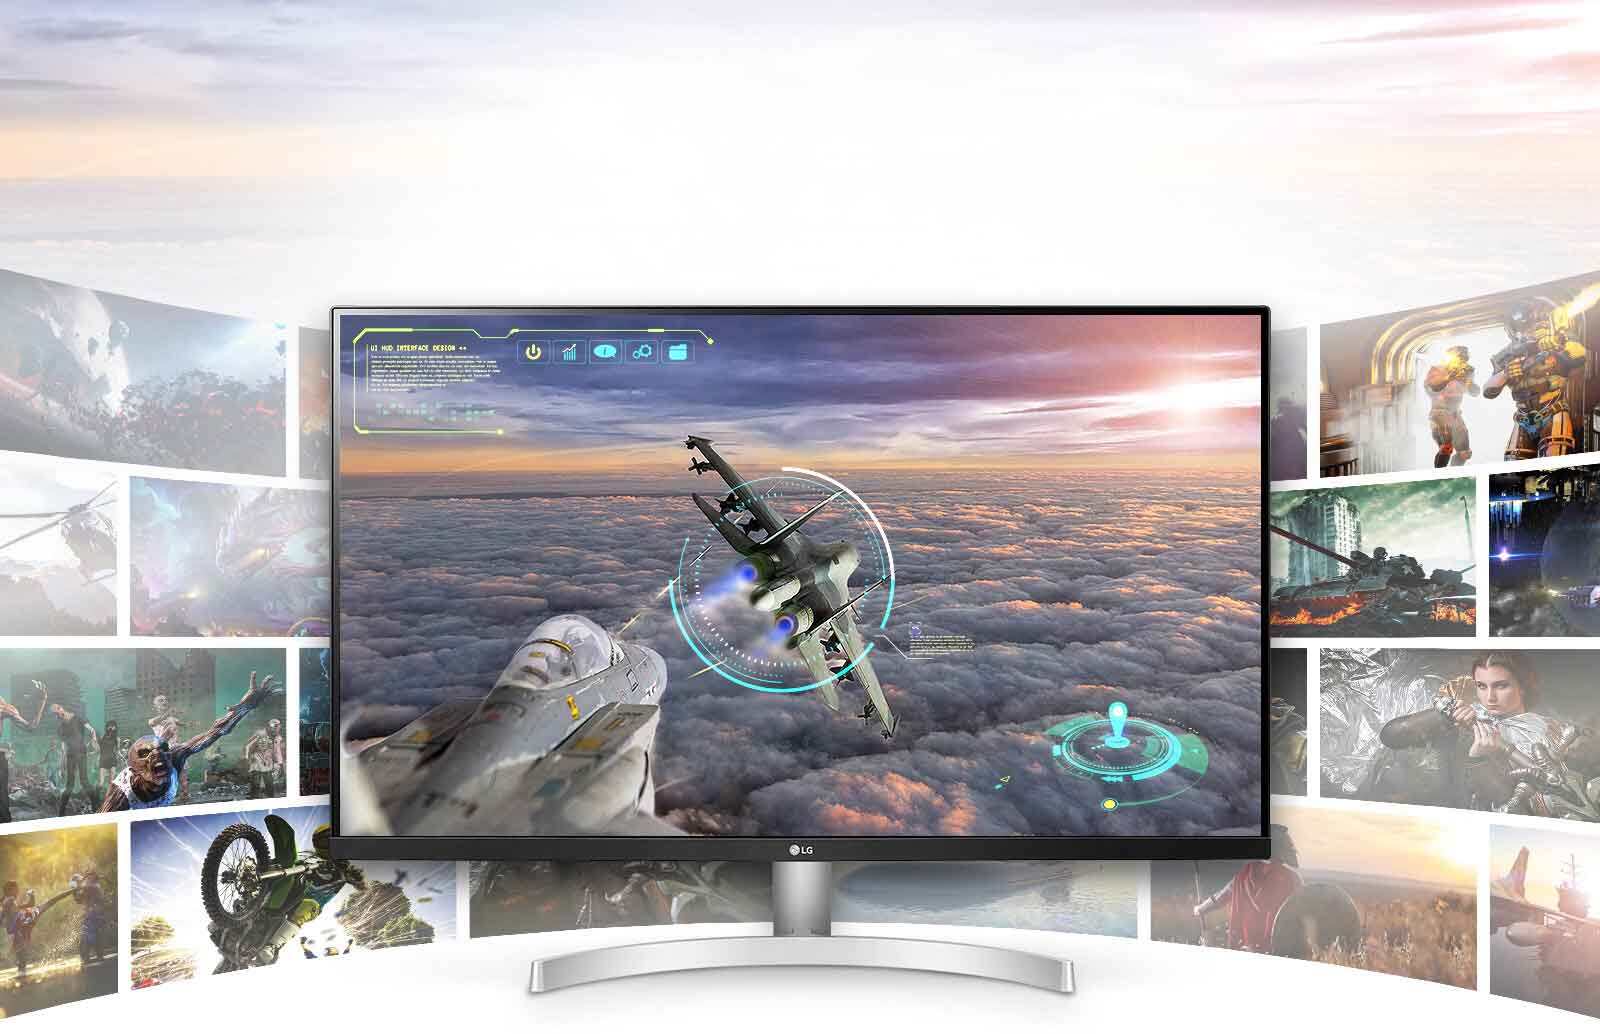 Gaming scene with exceptional clarity, and details in LG UHD 4K display